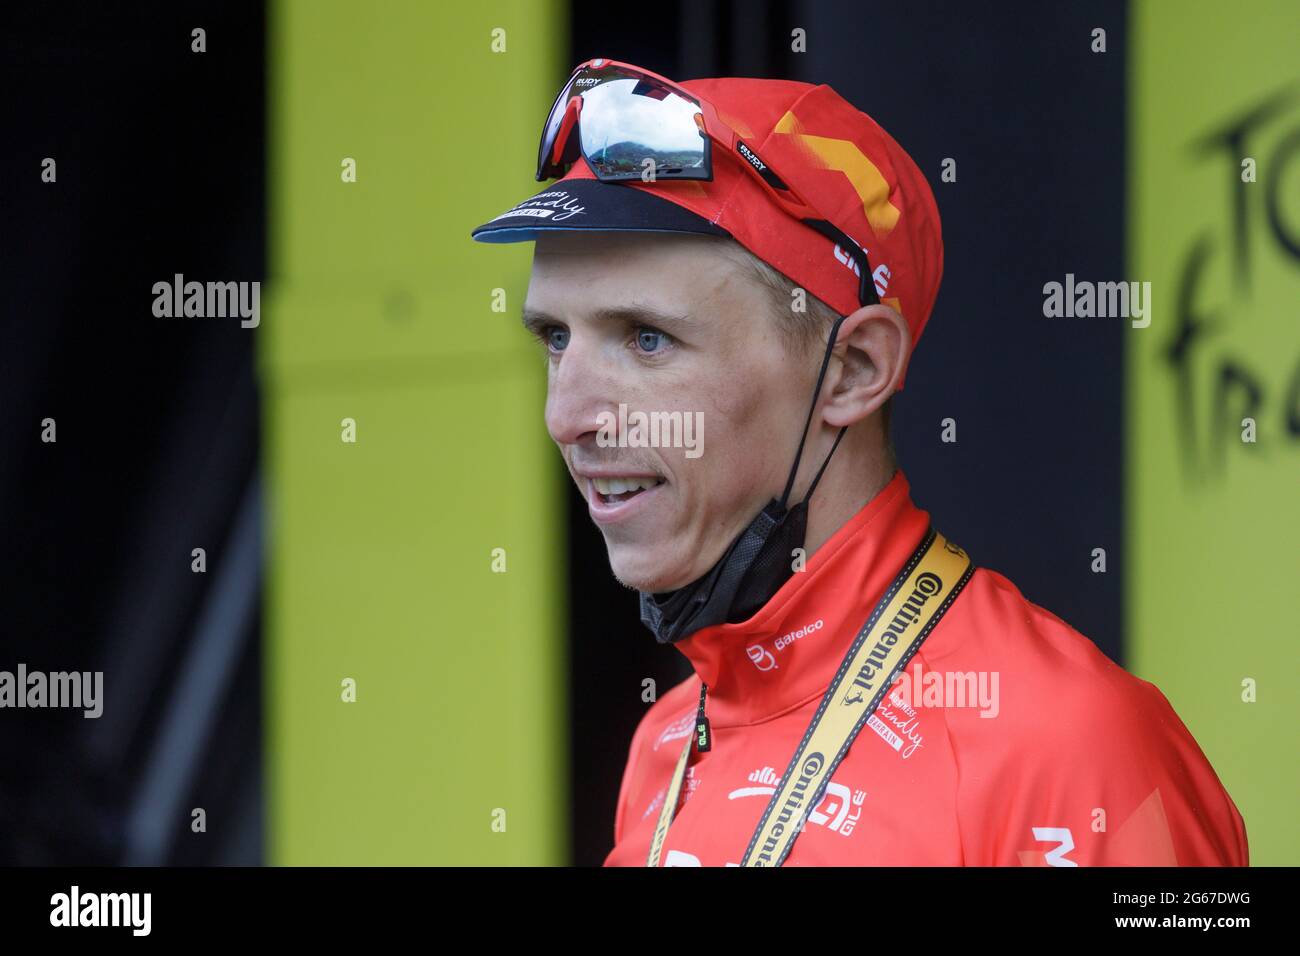 Le Grand-Bornand, France. 03 July 2021. Dylan Teuns claims the 8th stage of the Tour de France in Le Grand-Bornand. Julian Elliott News Photographyp Julian Elliott News Photography Julian Elliott News Photography Credit: Julian Elliott/Alamy Live News Stock Photo